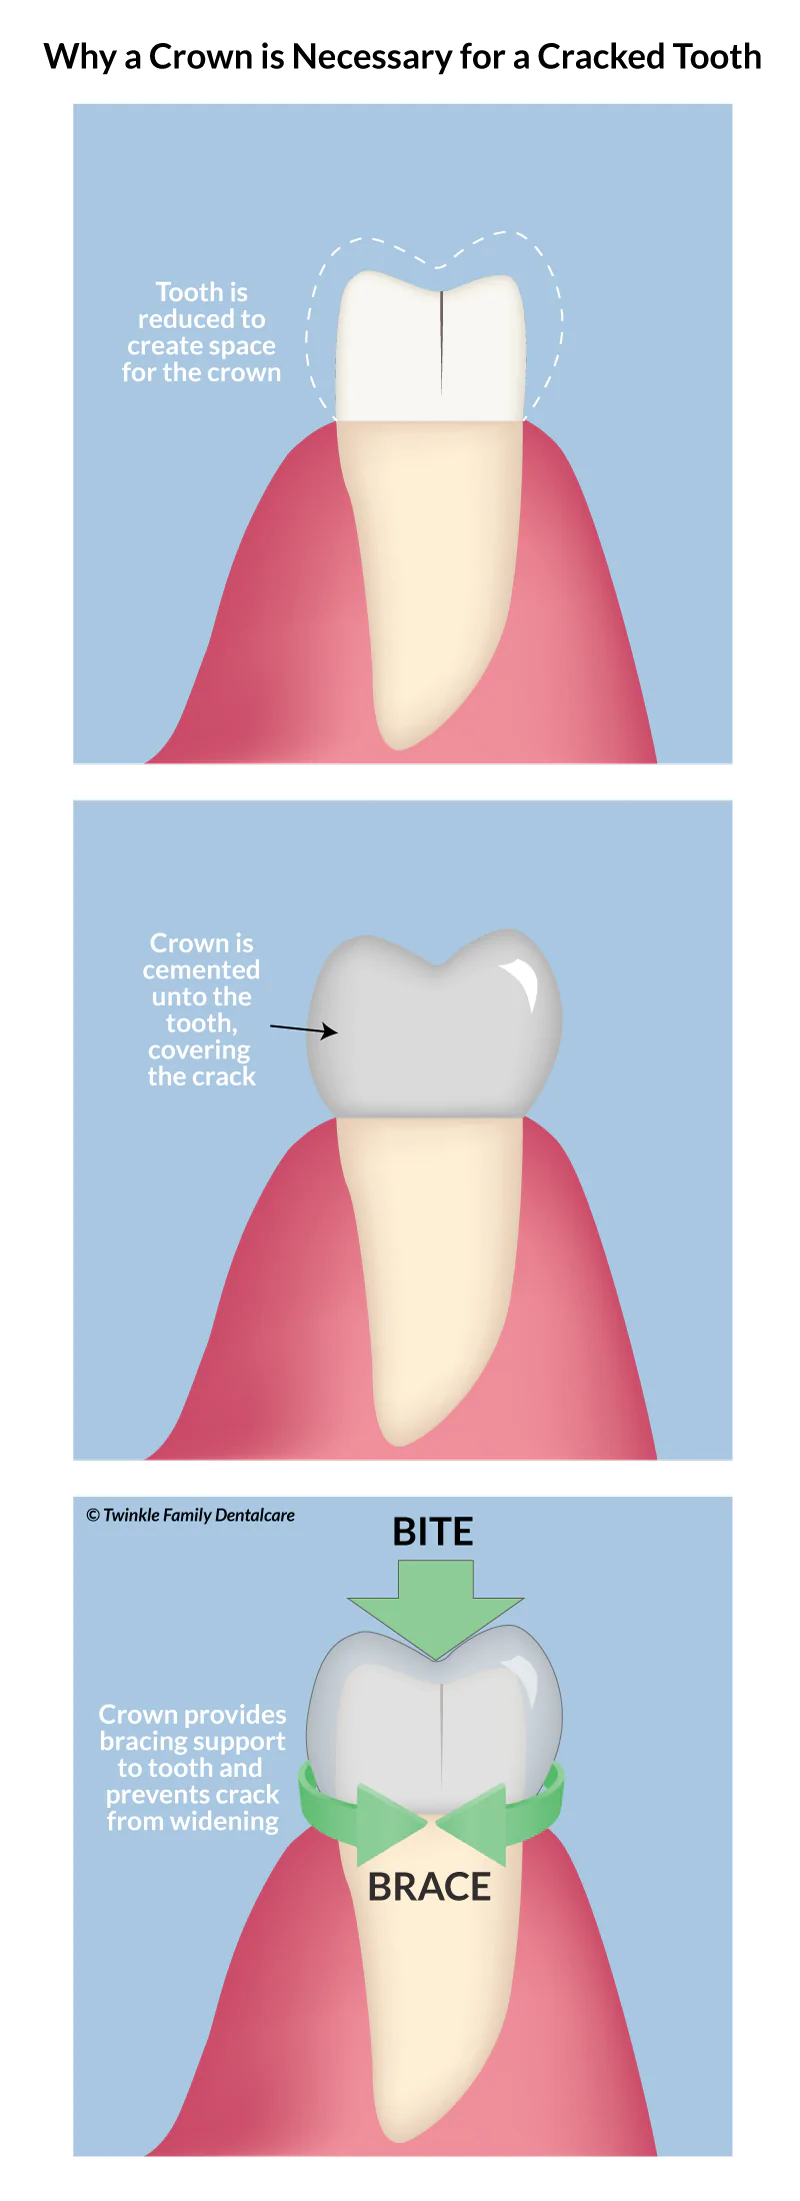 Why a crown is necessary for a cracked tooth, to provide bracing support